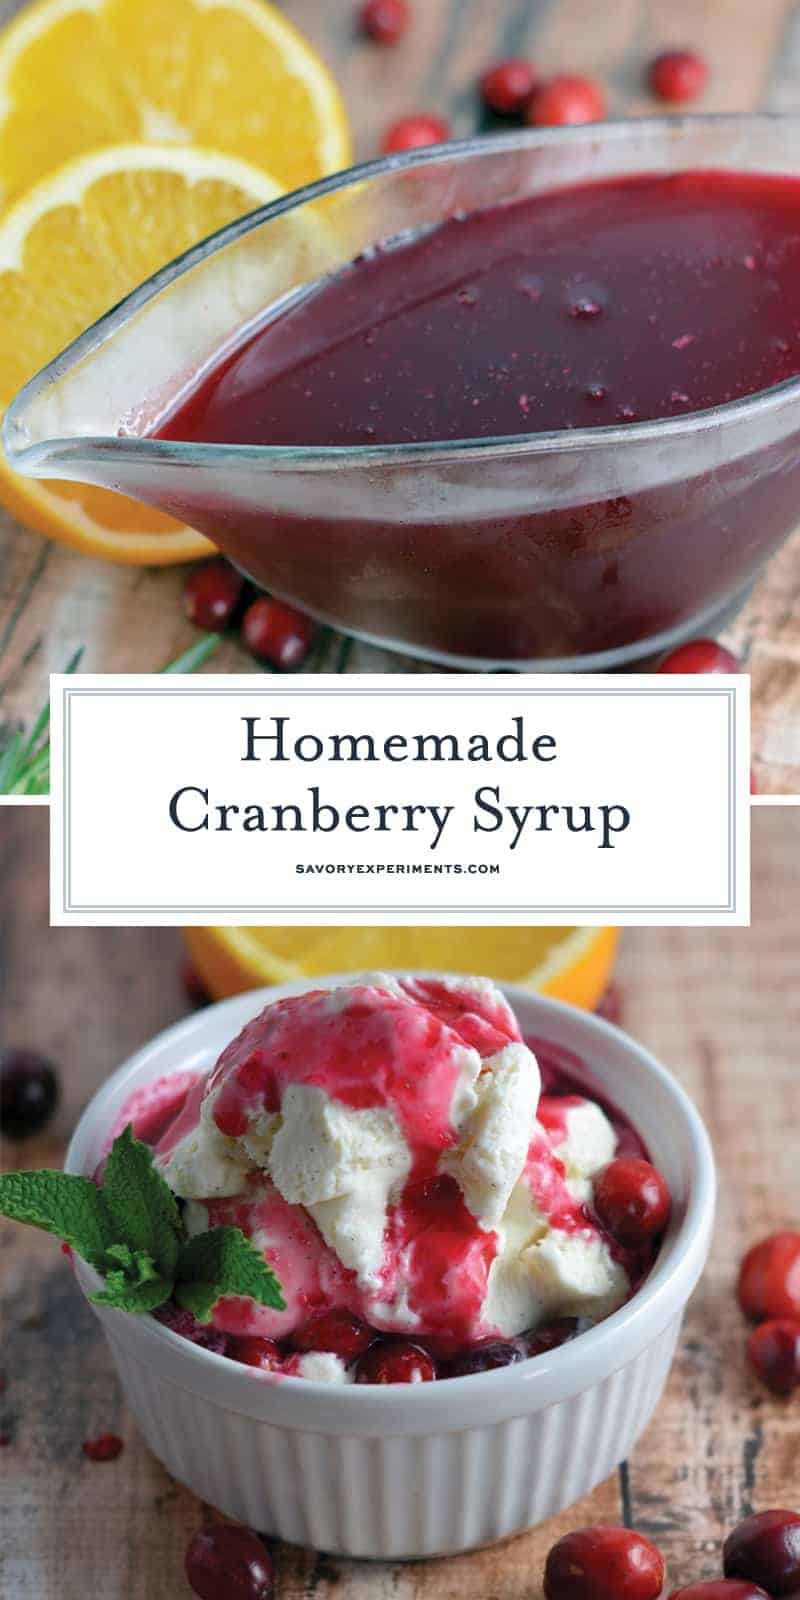 Ruby Red Cranberry Syrup is a tartly sweet flavored syrup that will wake up your taste buds! Serve for breakfast or dessert! #cranberrysyrup #homemadesyrup #flavoredsyrup www.savoryexperiments.com